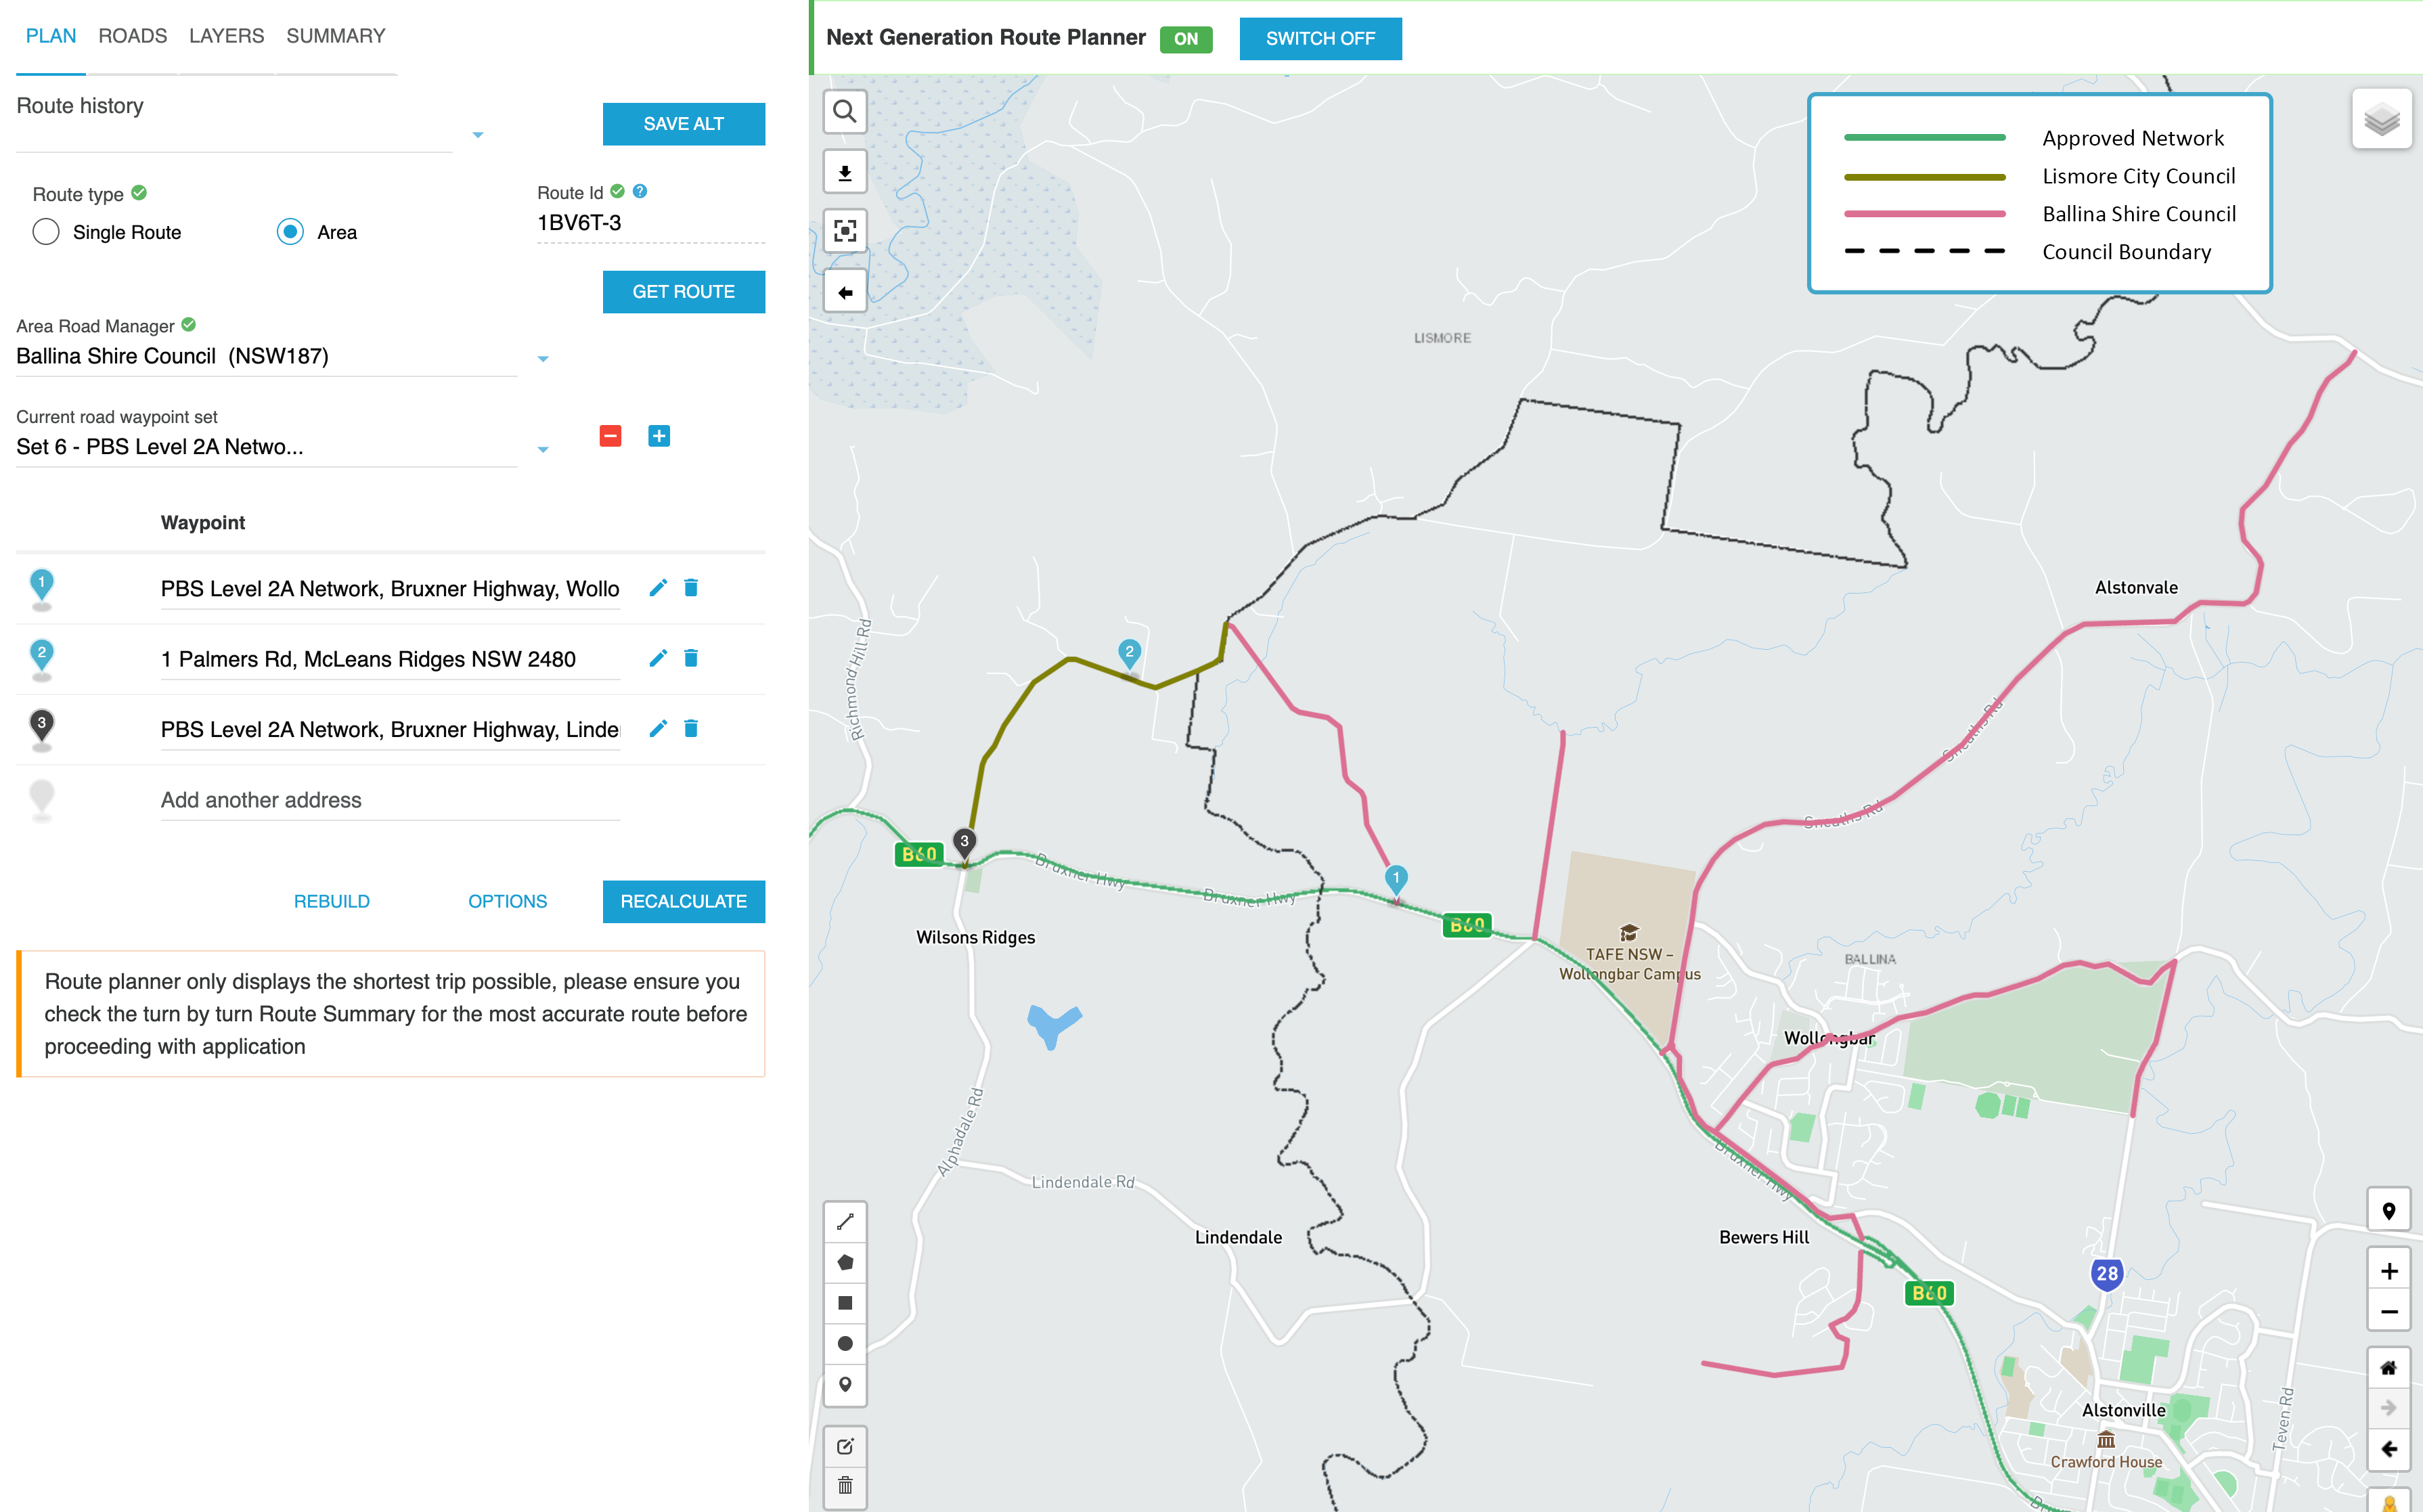 Image is of an area application within one council boundary involved for a single freight task on the Next Generation Route Planner.